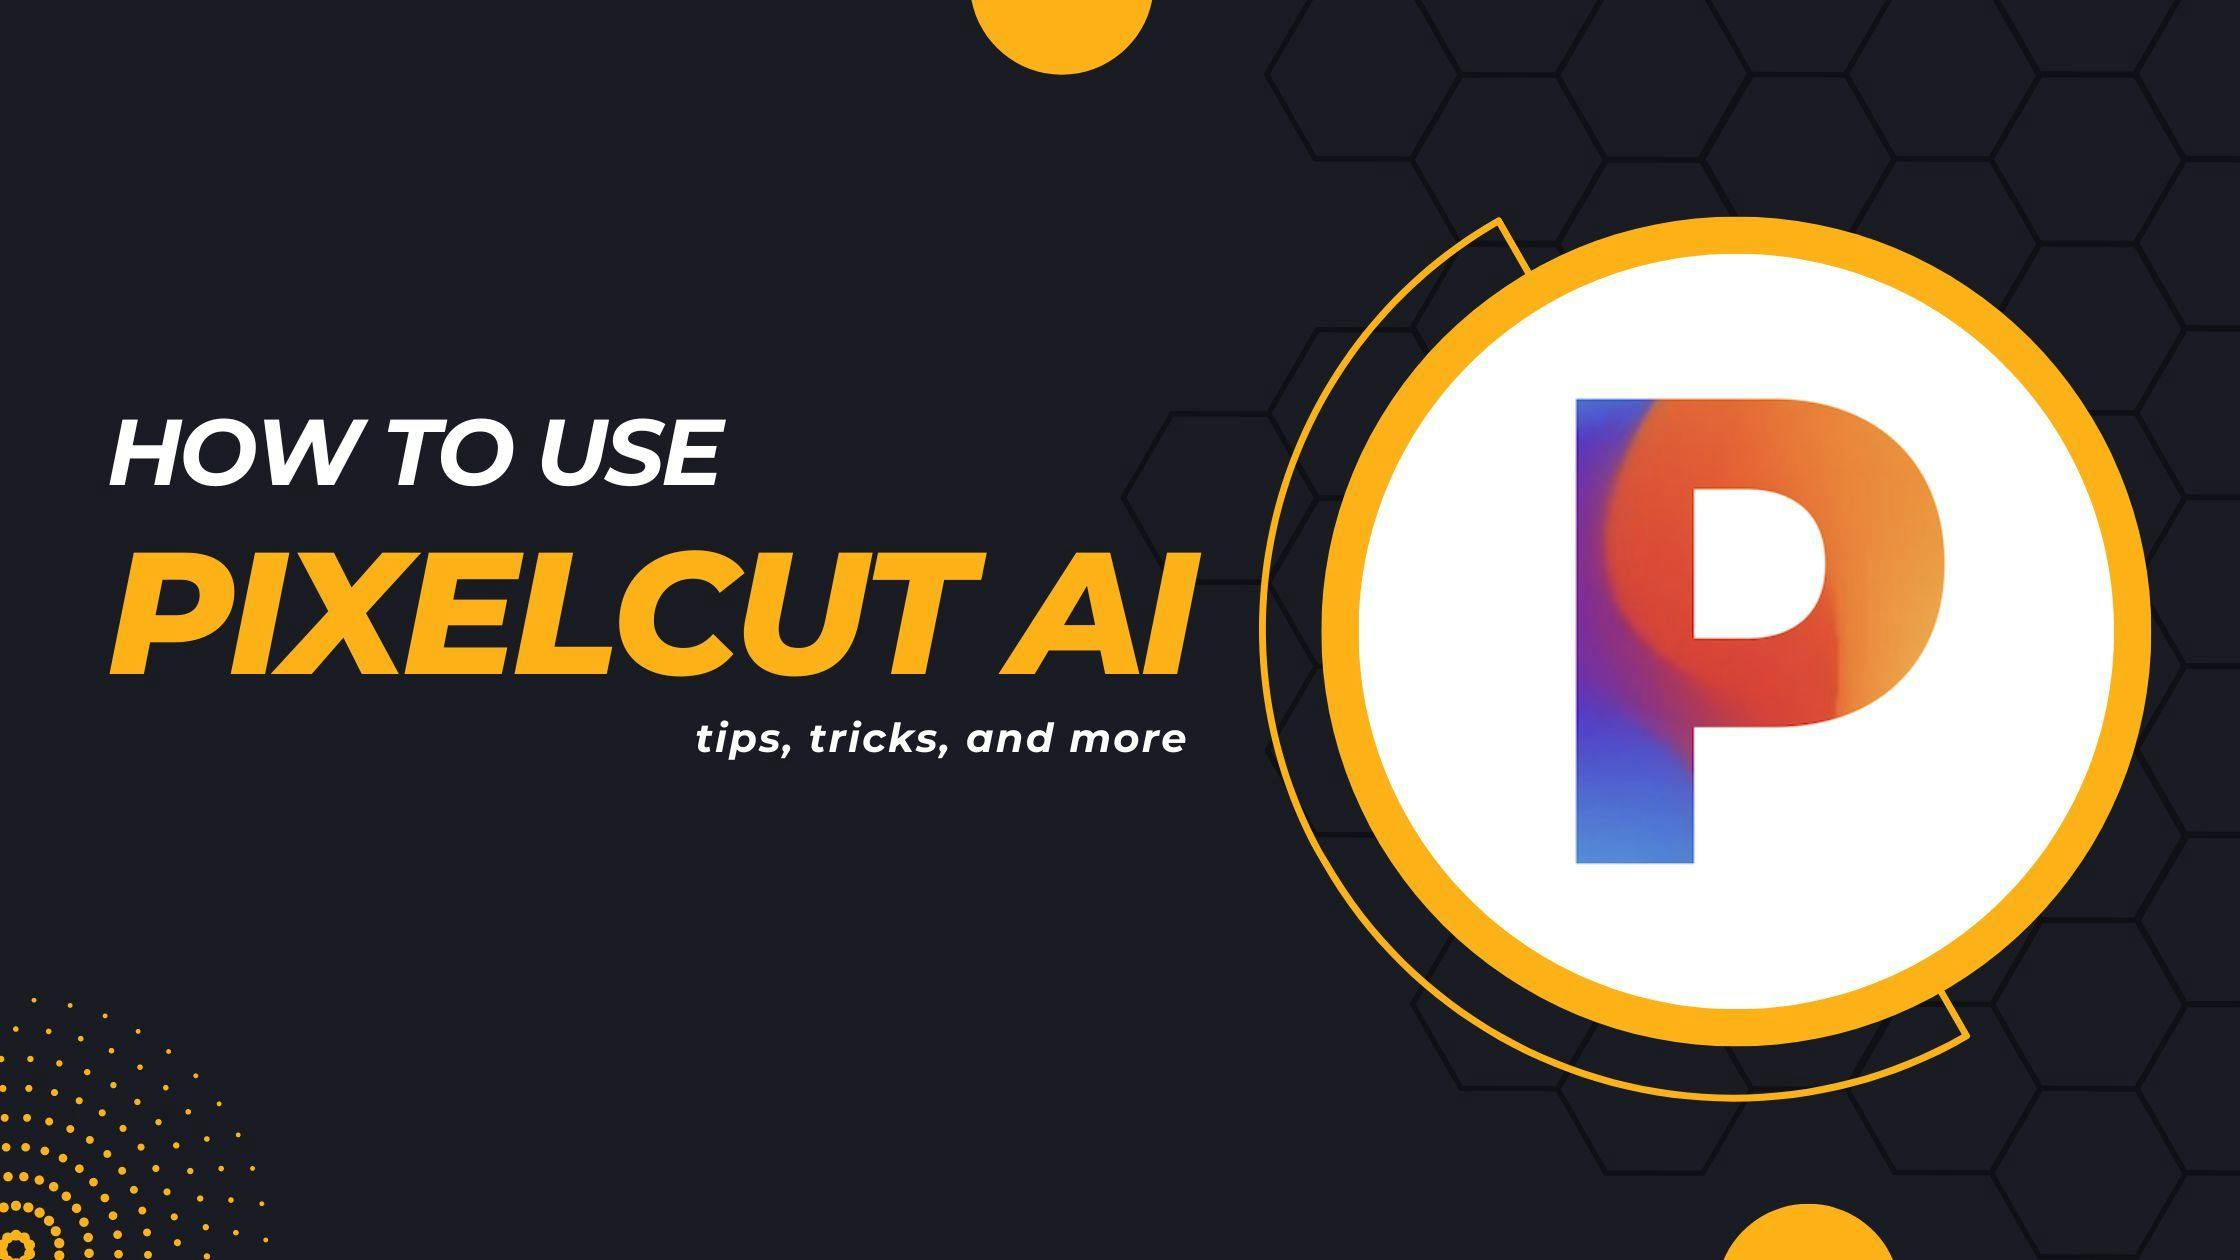 Cover Image for How to use Pixelcut AI, tips, tricks, and more